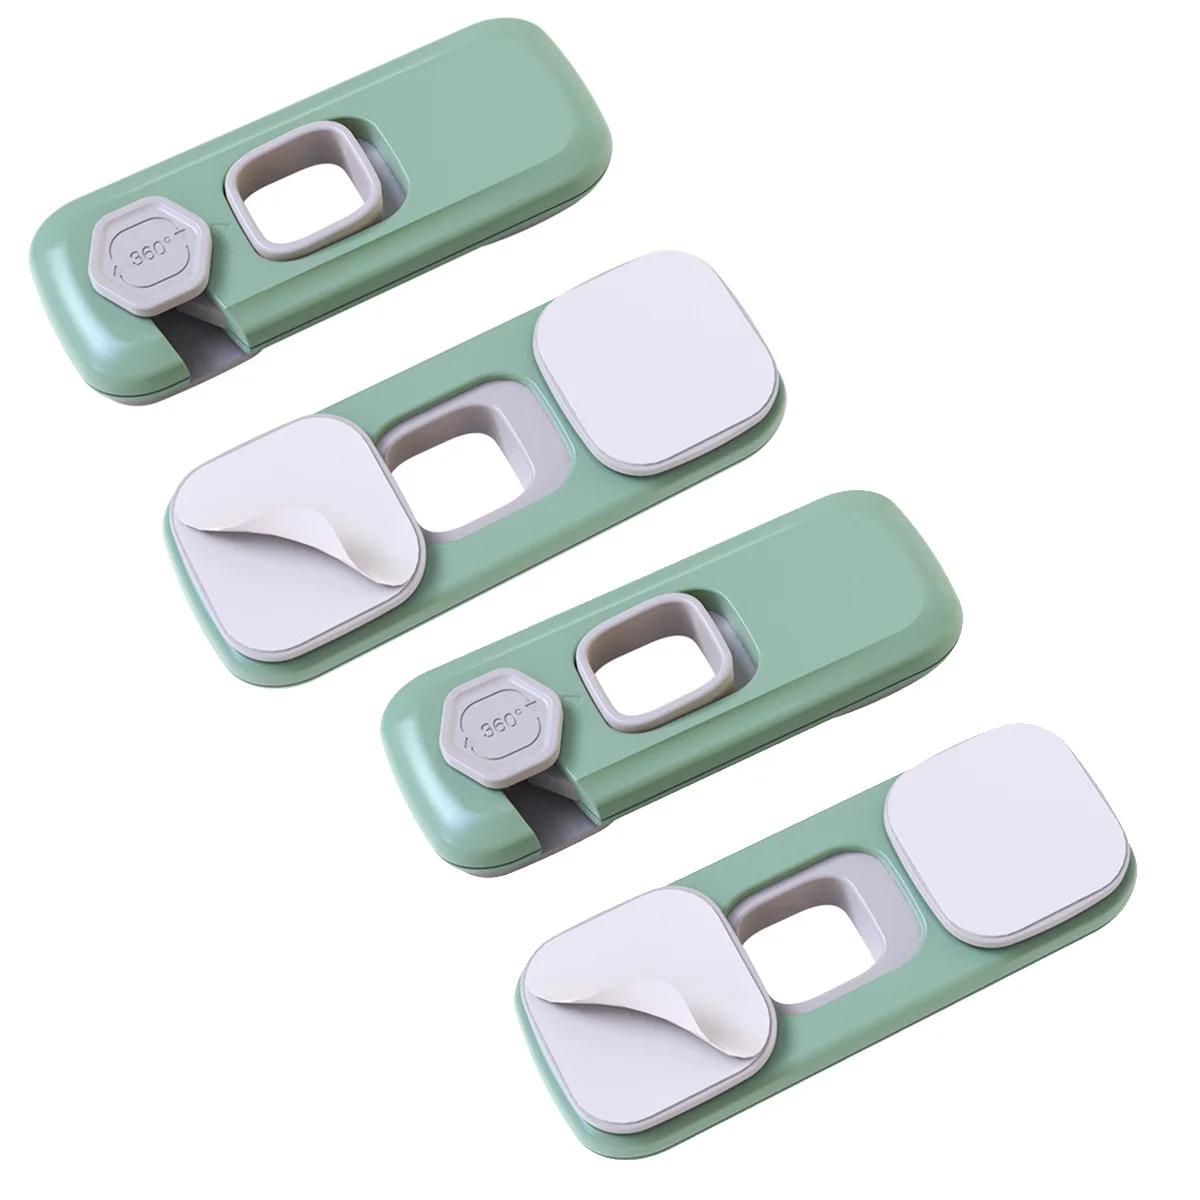 

Child Safety Lock Baby Proofing Latch Cabinet Locks Drawers Cabinets Strap Products Door